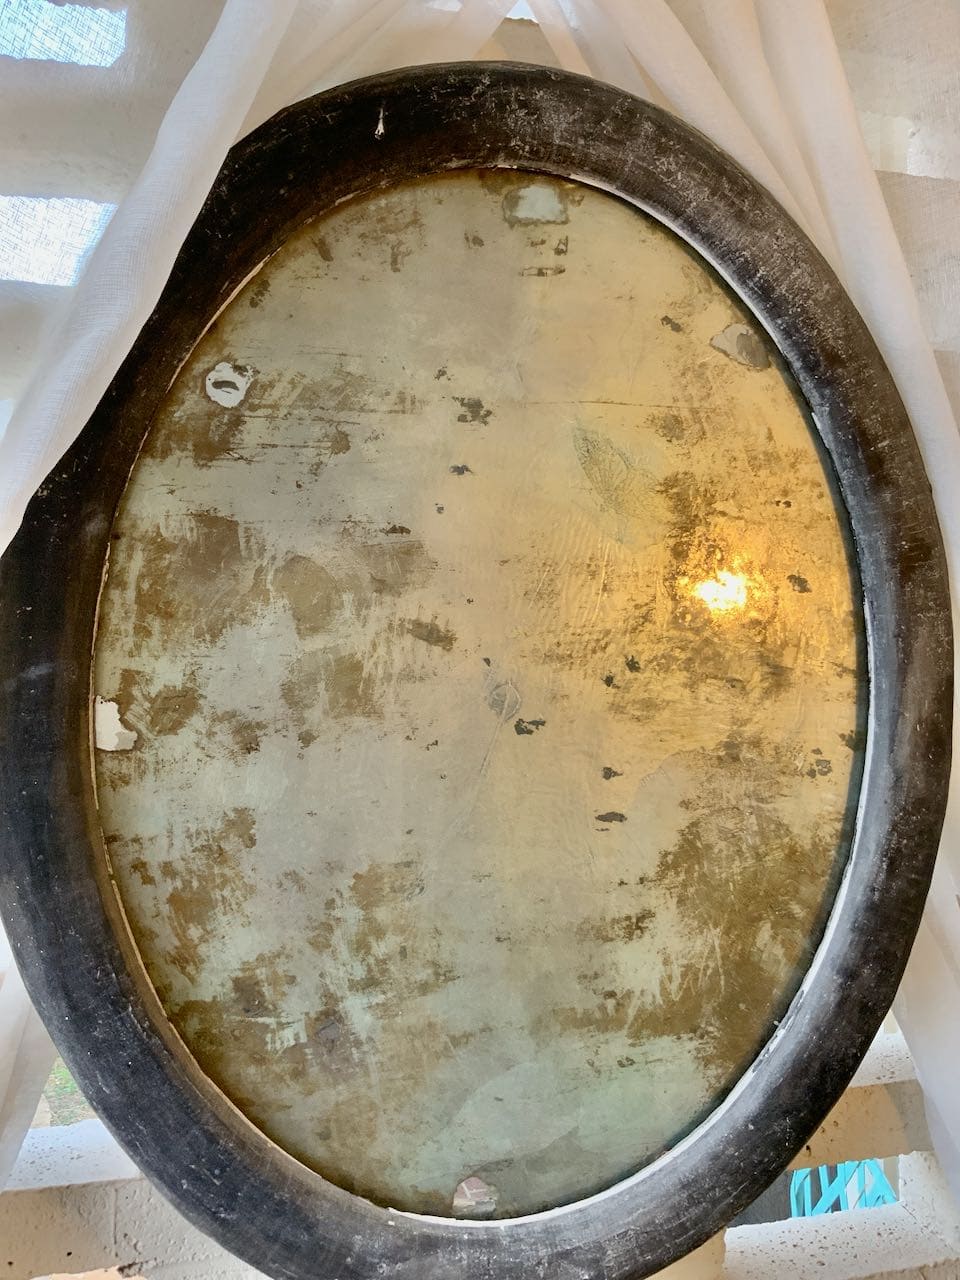 A large oval mirror with an aging technique that mottled the reflective glass